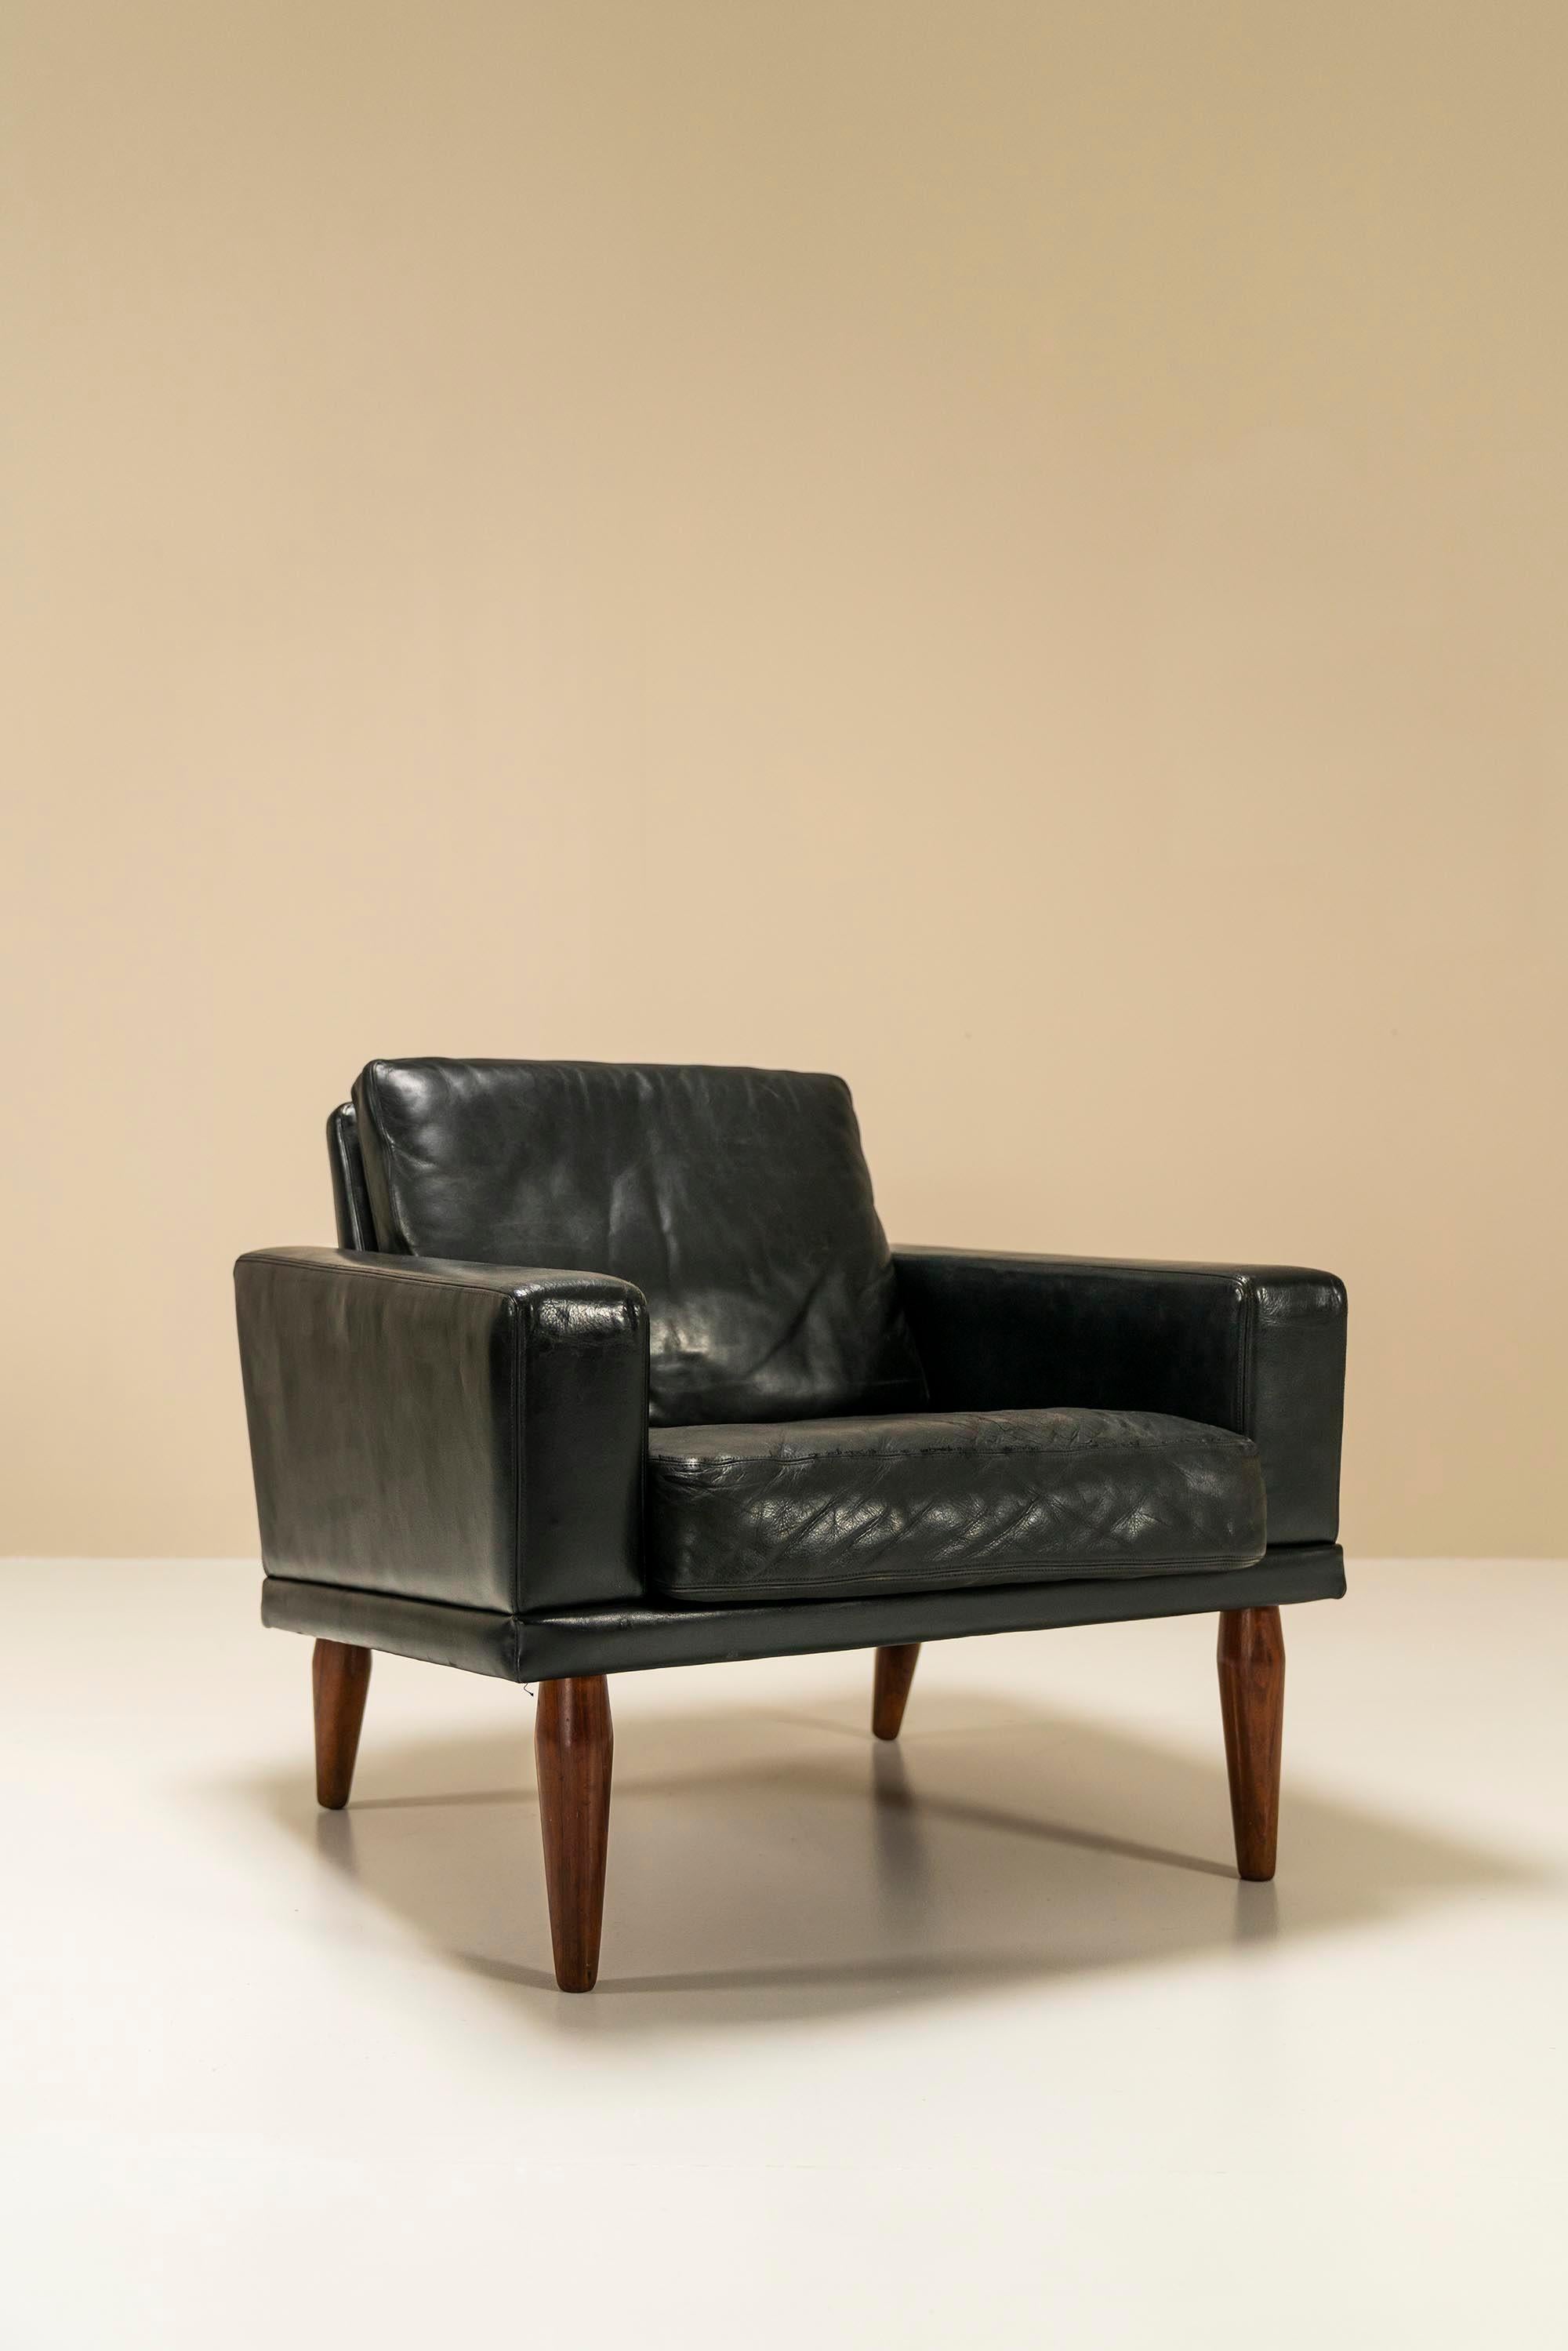 Leather Bovenkamp Three-Seater Sofa and Lounge Chair, The Netherlands 1960s